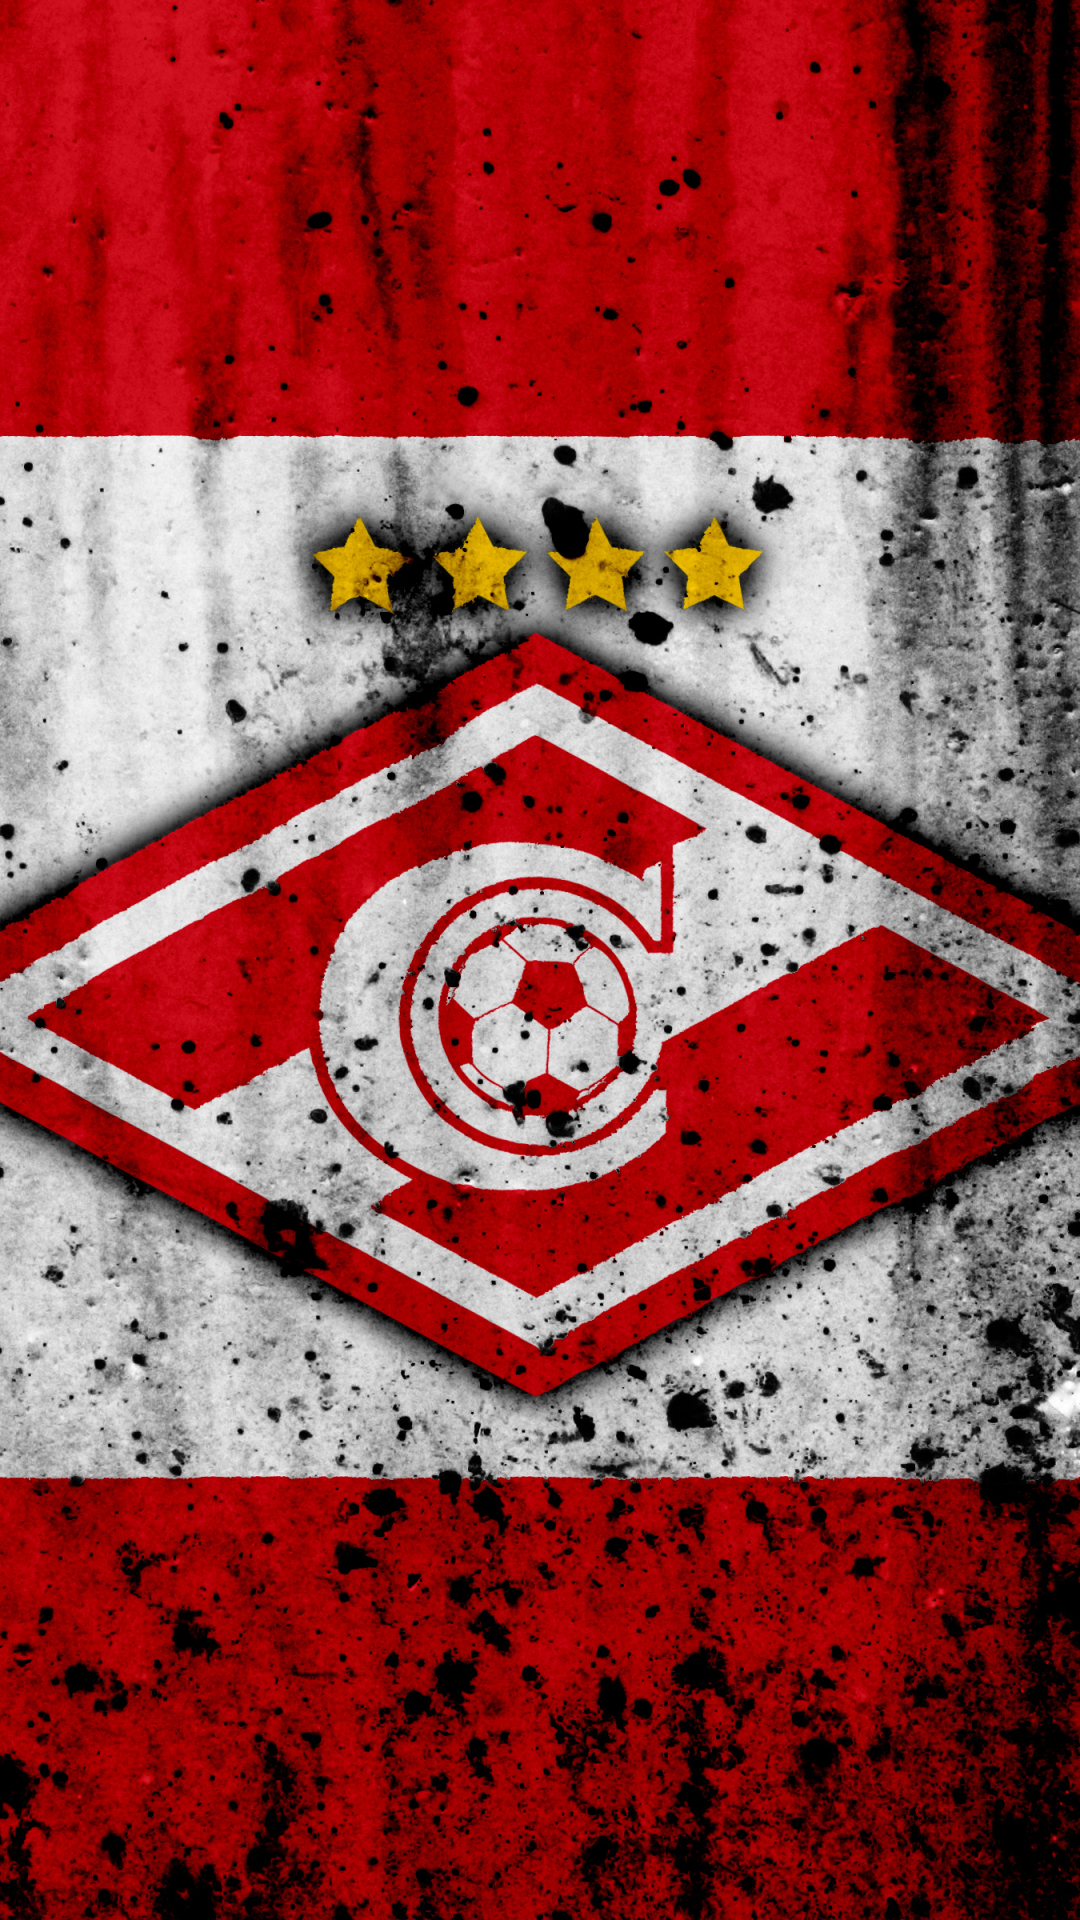 FC Spartak Moscow Wallpapers - Wallpaper Cave